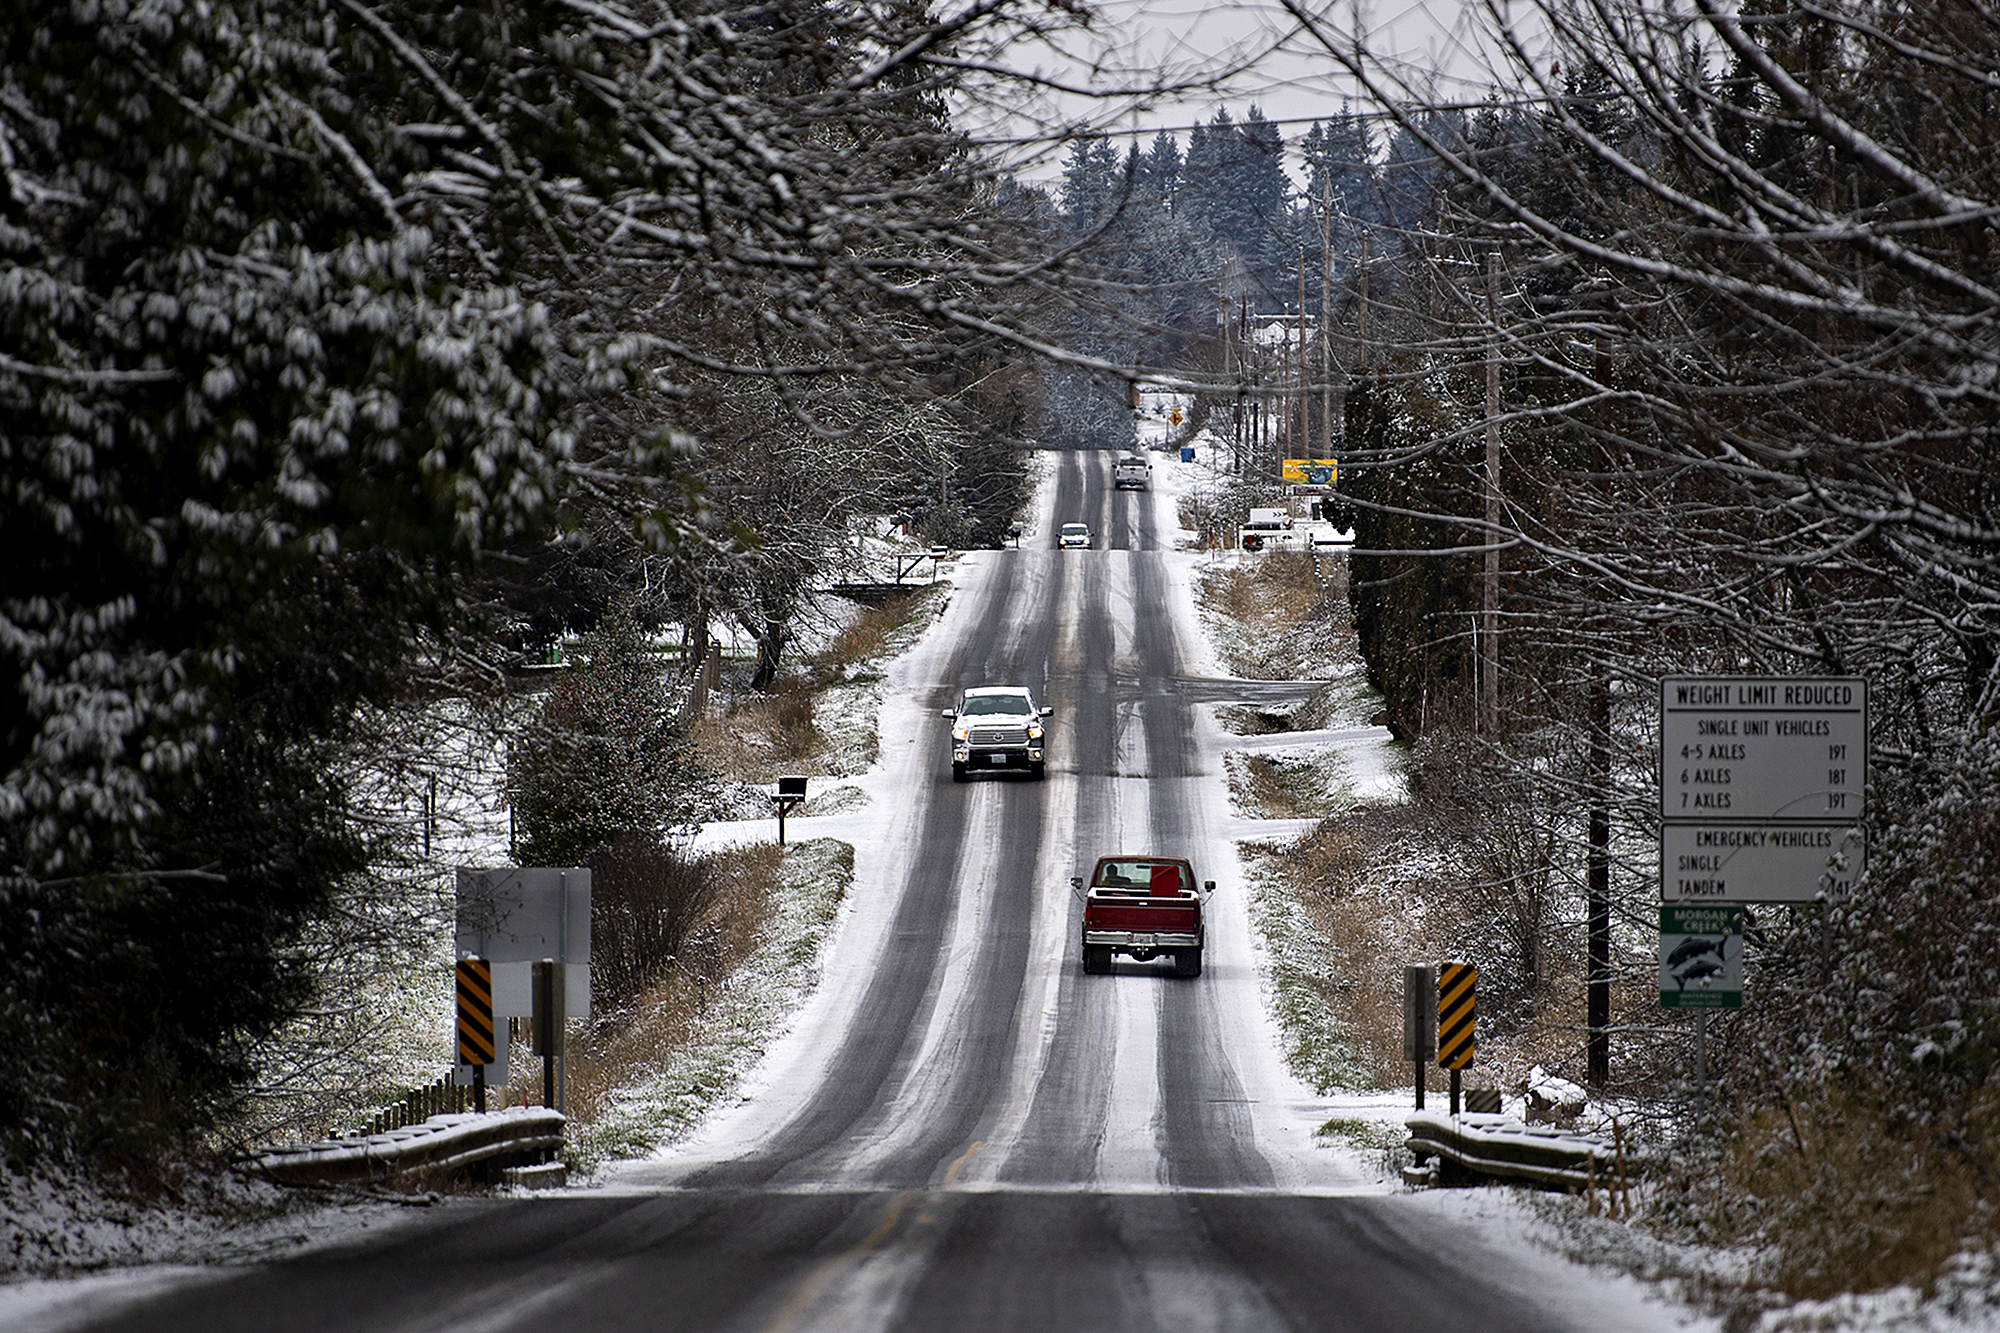 Drivers in Hockinson navigate through a snowy scene after a light blanket of snow dusted the area Monday morning, Dec. 27, 2021.